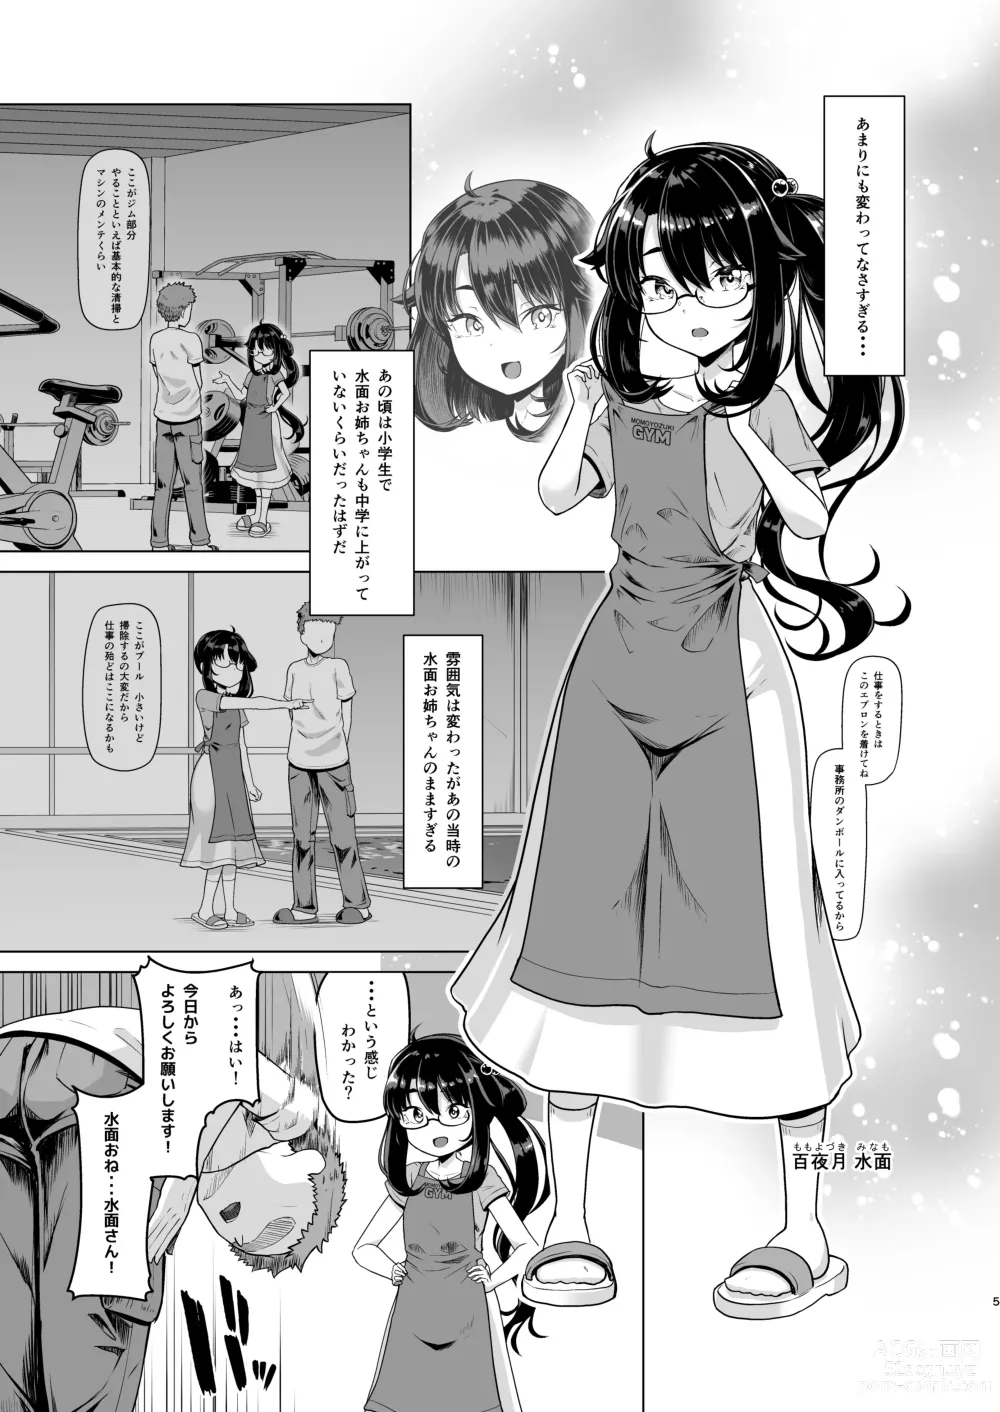 Page 4 of doujinshi 僕だけが知っている深夜の水面